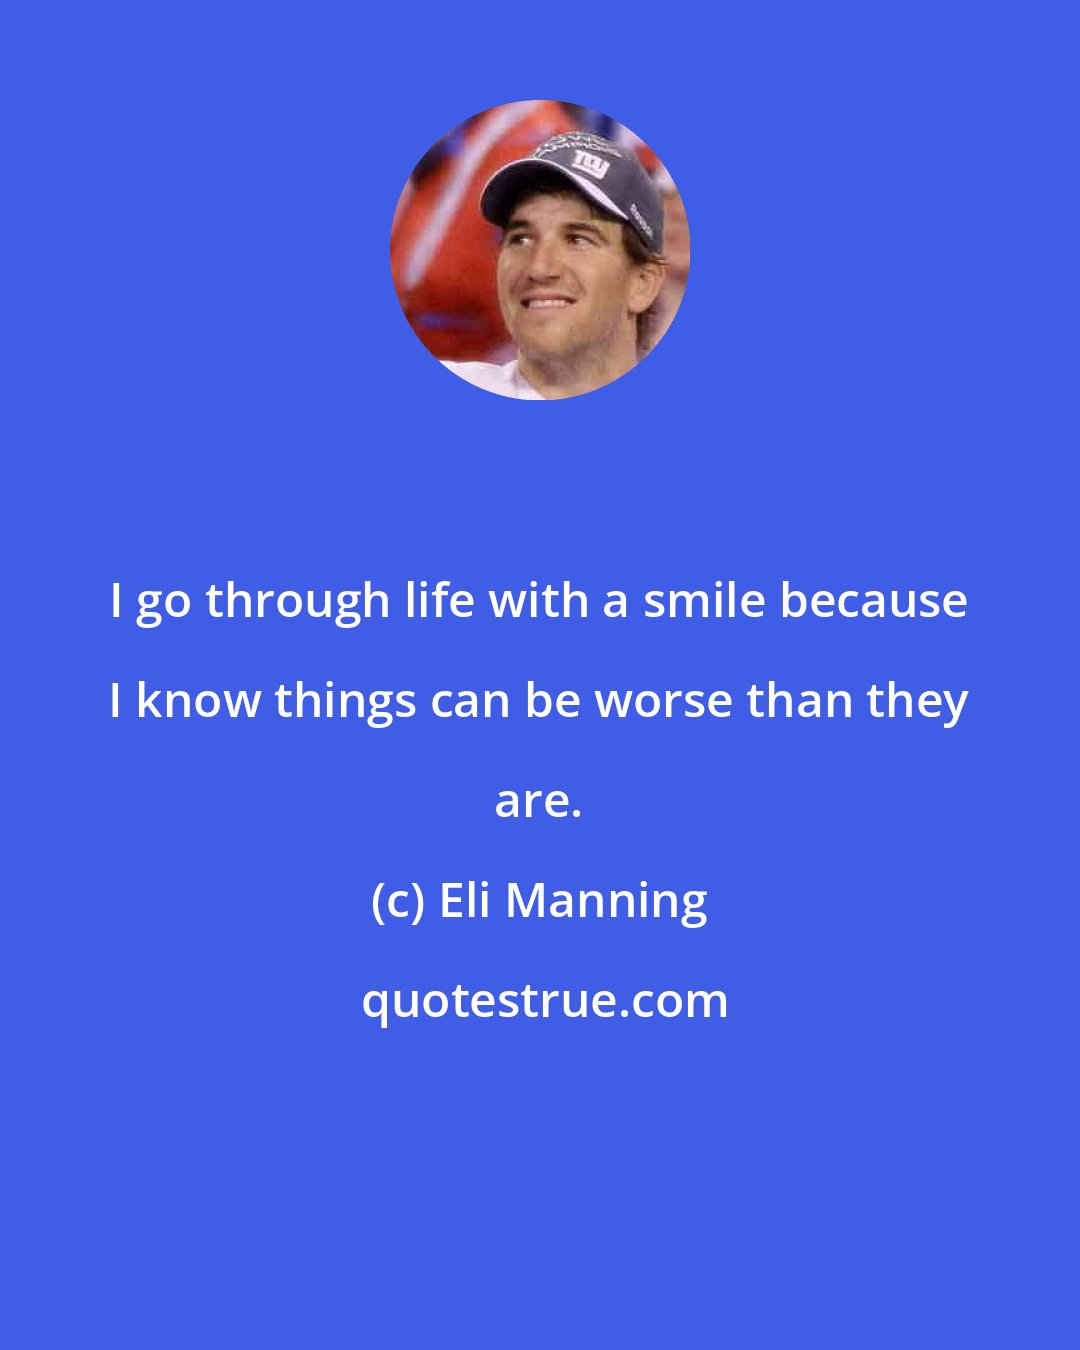 Eli Manning: I go through life with a smile because I know things can be worse than they are.